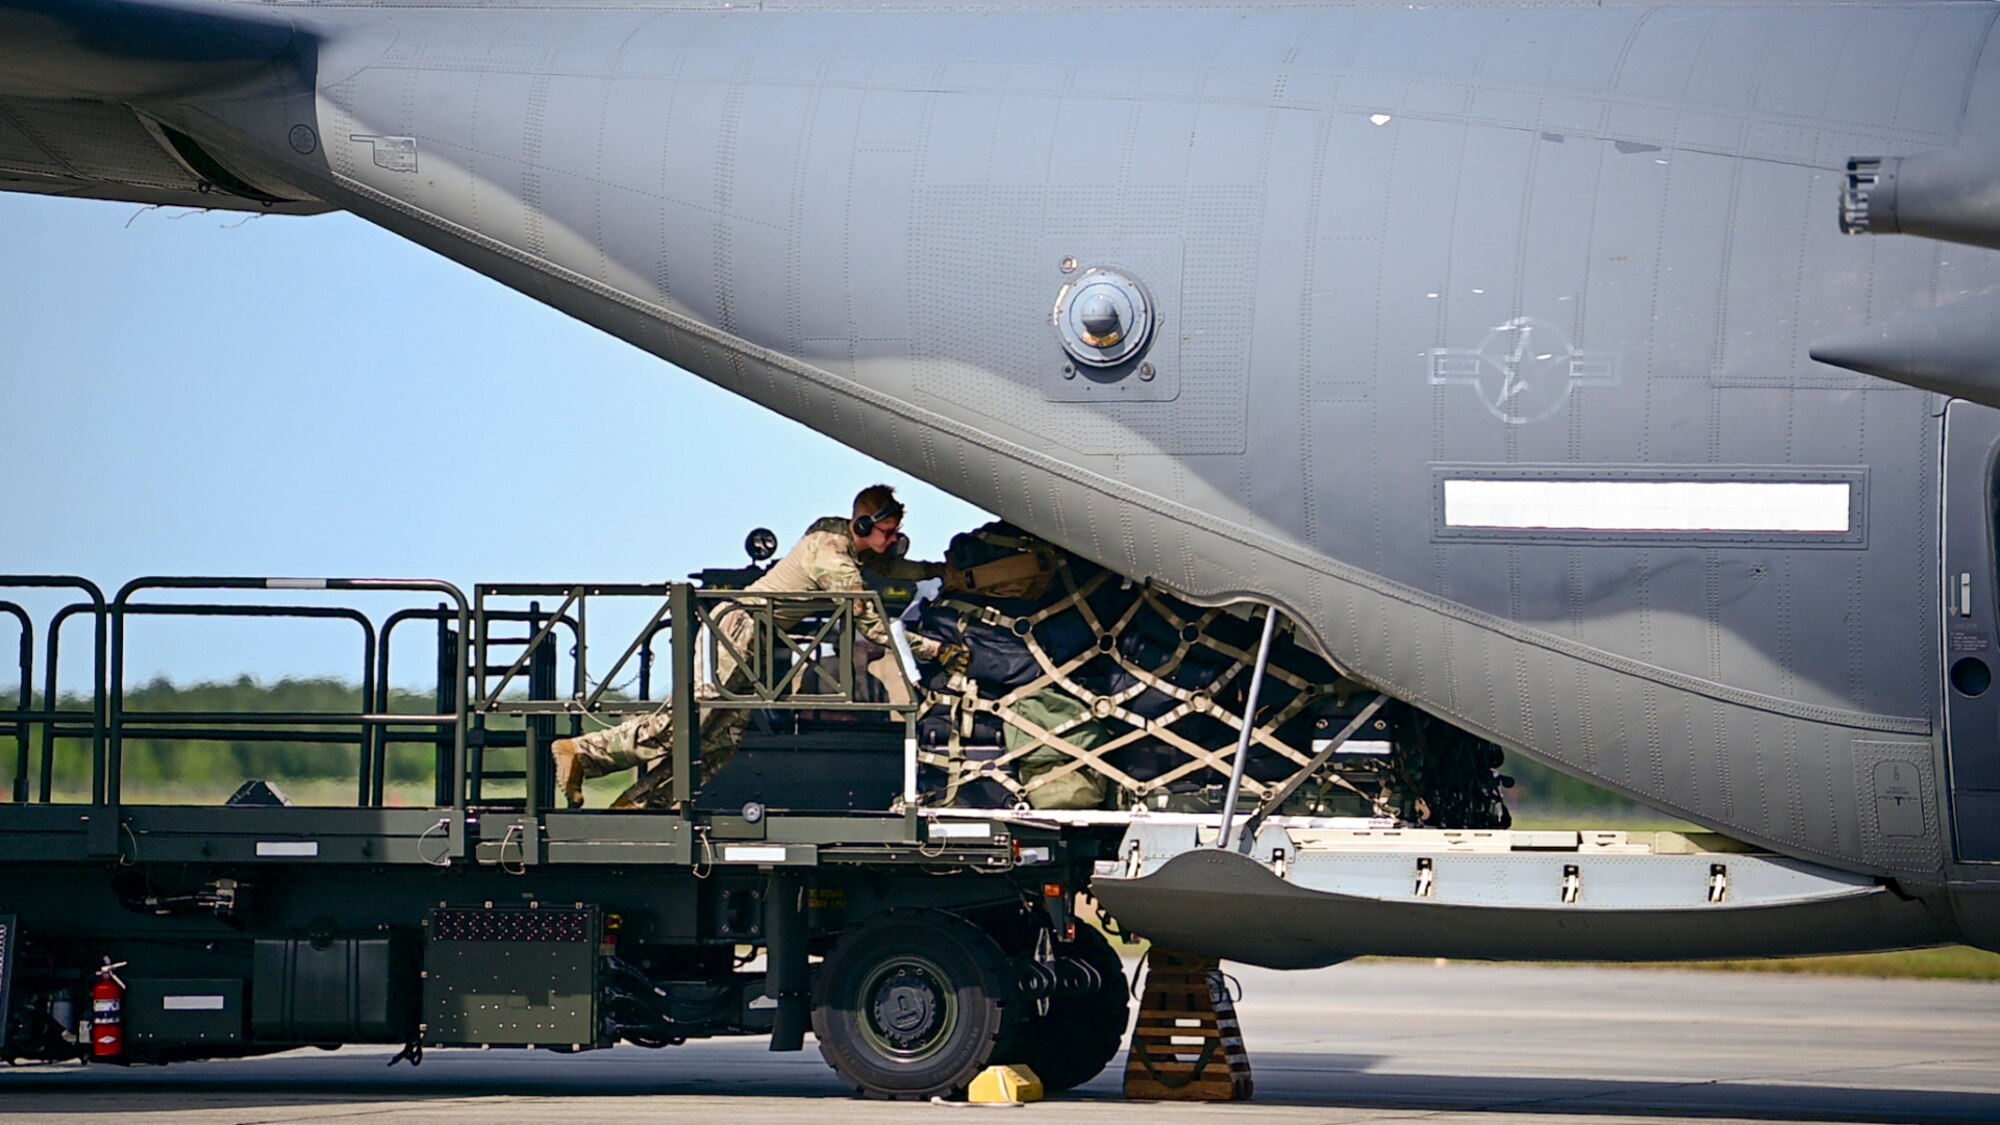 U.S Air Force Airmen assigned to the 23rd Wing load equipment onto an HC-130J Combat King II from the 71st Rescue Squadron at Moody Air Force Base, Georgia, April 8, 2024. Airmen from the 23rd Wing are prepared to assist in any operation that is pertinent to exercises regarding Moody AFB, Air Combat Command and the U.S. Air Force. Ready Tiger 24-1 is a readiness exercise demonstrating the 23rd Wing’s ability to plan, prepare and execute operations and maintenance to project air power in contested and dispersed locations, defending the United States’ interests and allies. (U.S. Air Force photo by 2nd Lt. Benjamin Williams)